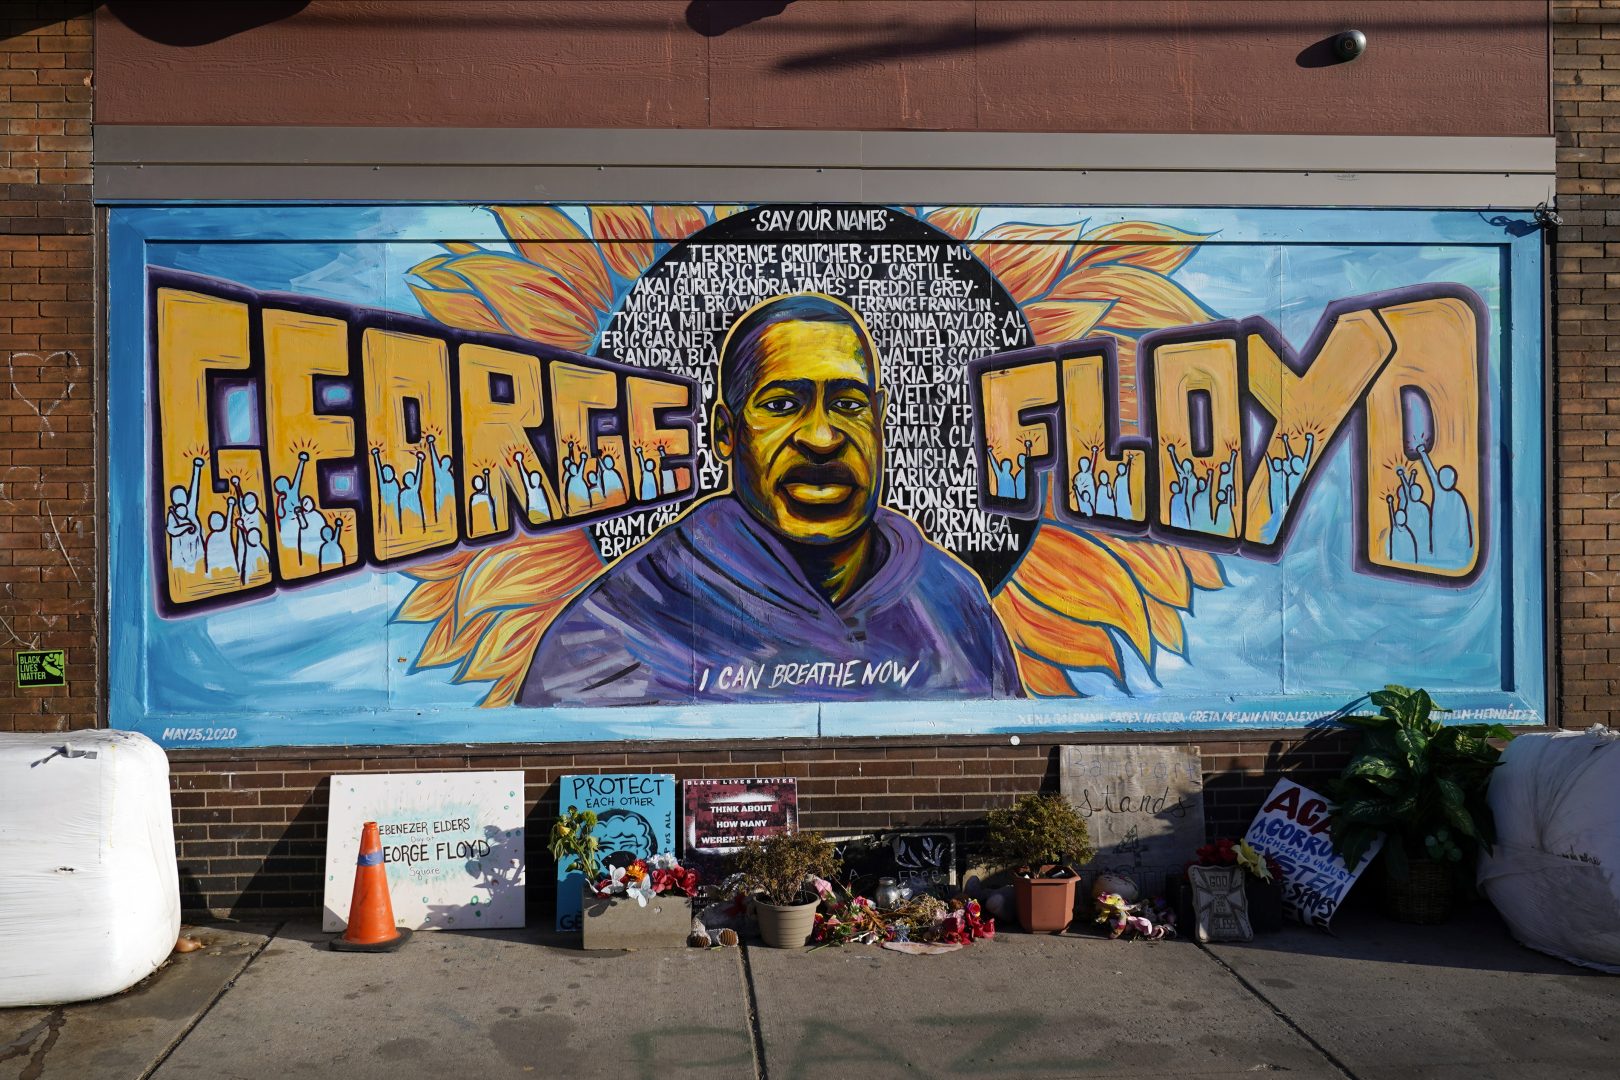 George Floyd Square is shown on Feb. 8, 2021, in Minneapolis. Ten months after police officers brushed off George Floyd's moans for help on the street outside a south Minneapolis grocery, the square remains a makeshift memorial for Floyd who died at the hand of police making an arrest.